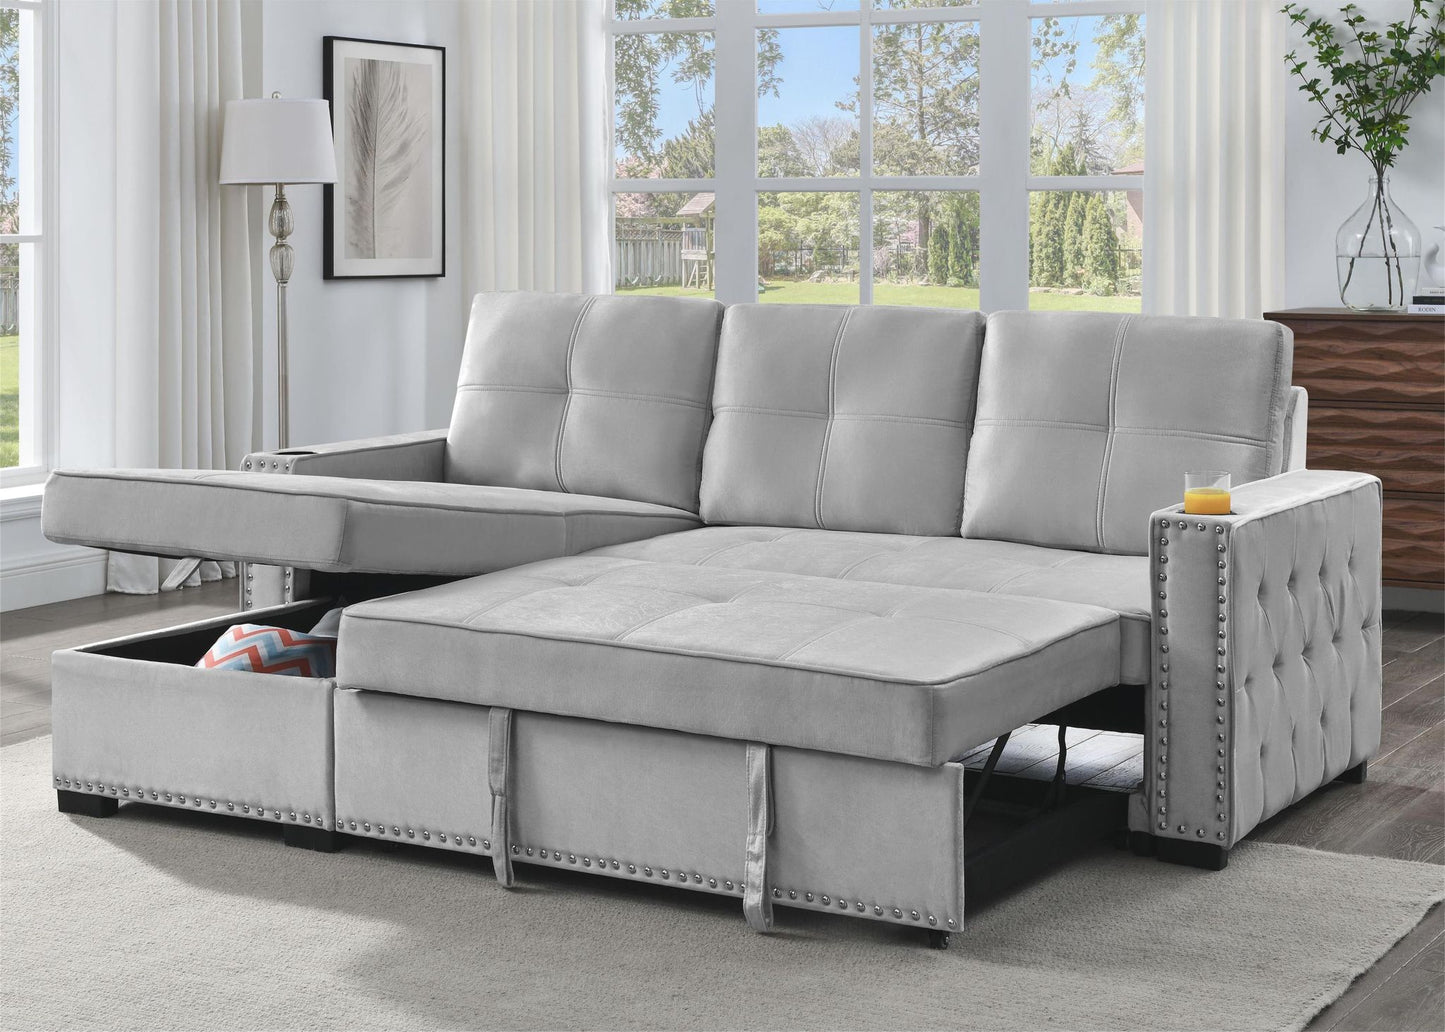 (401 NH MCDONALDS LIGHT GREY)- FABRIC- REVERSIBLE SECTIONAL SOFA- WITH PULL OUT BED